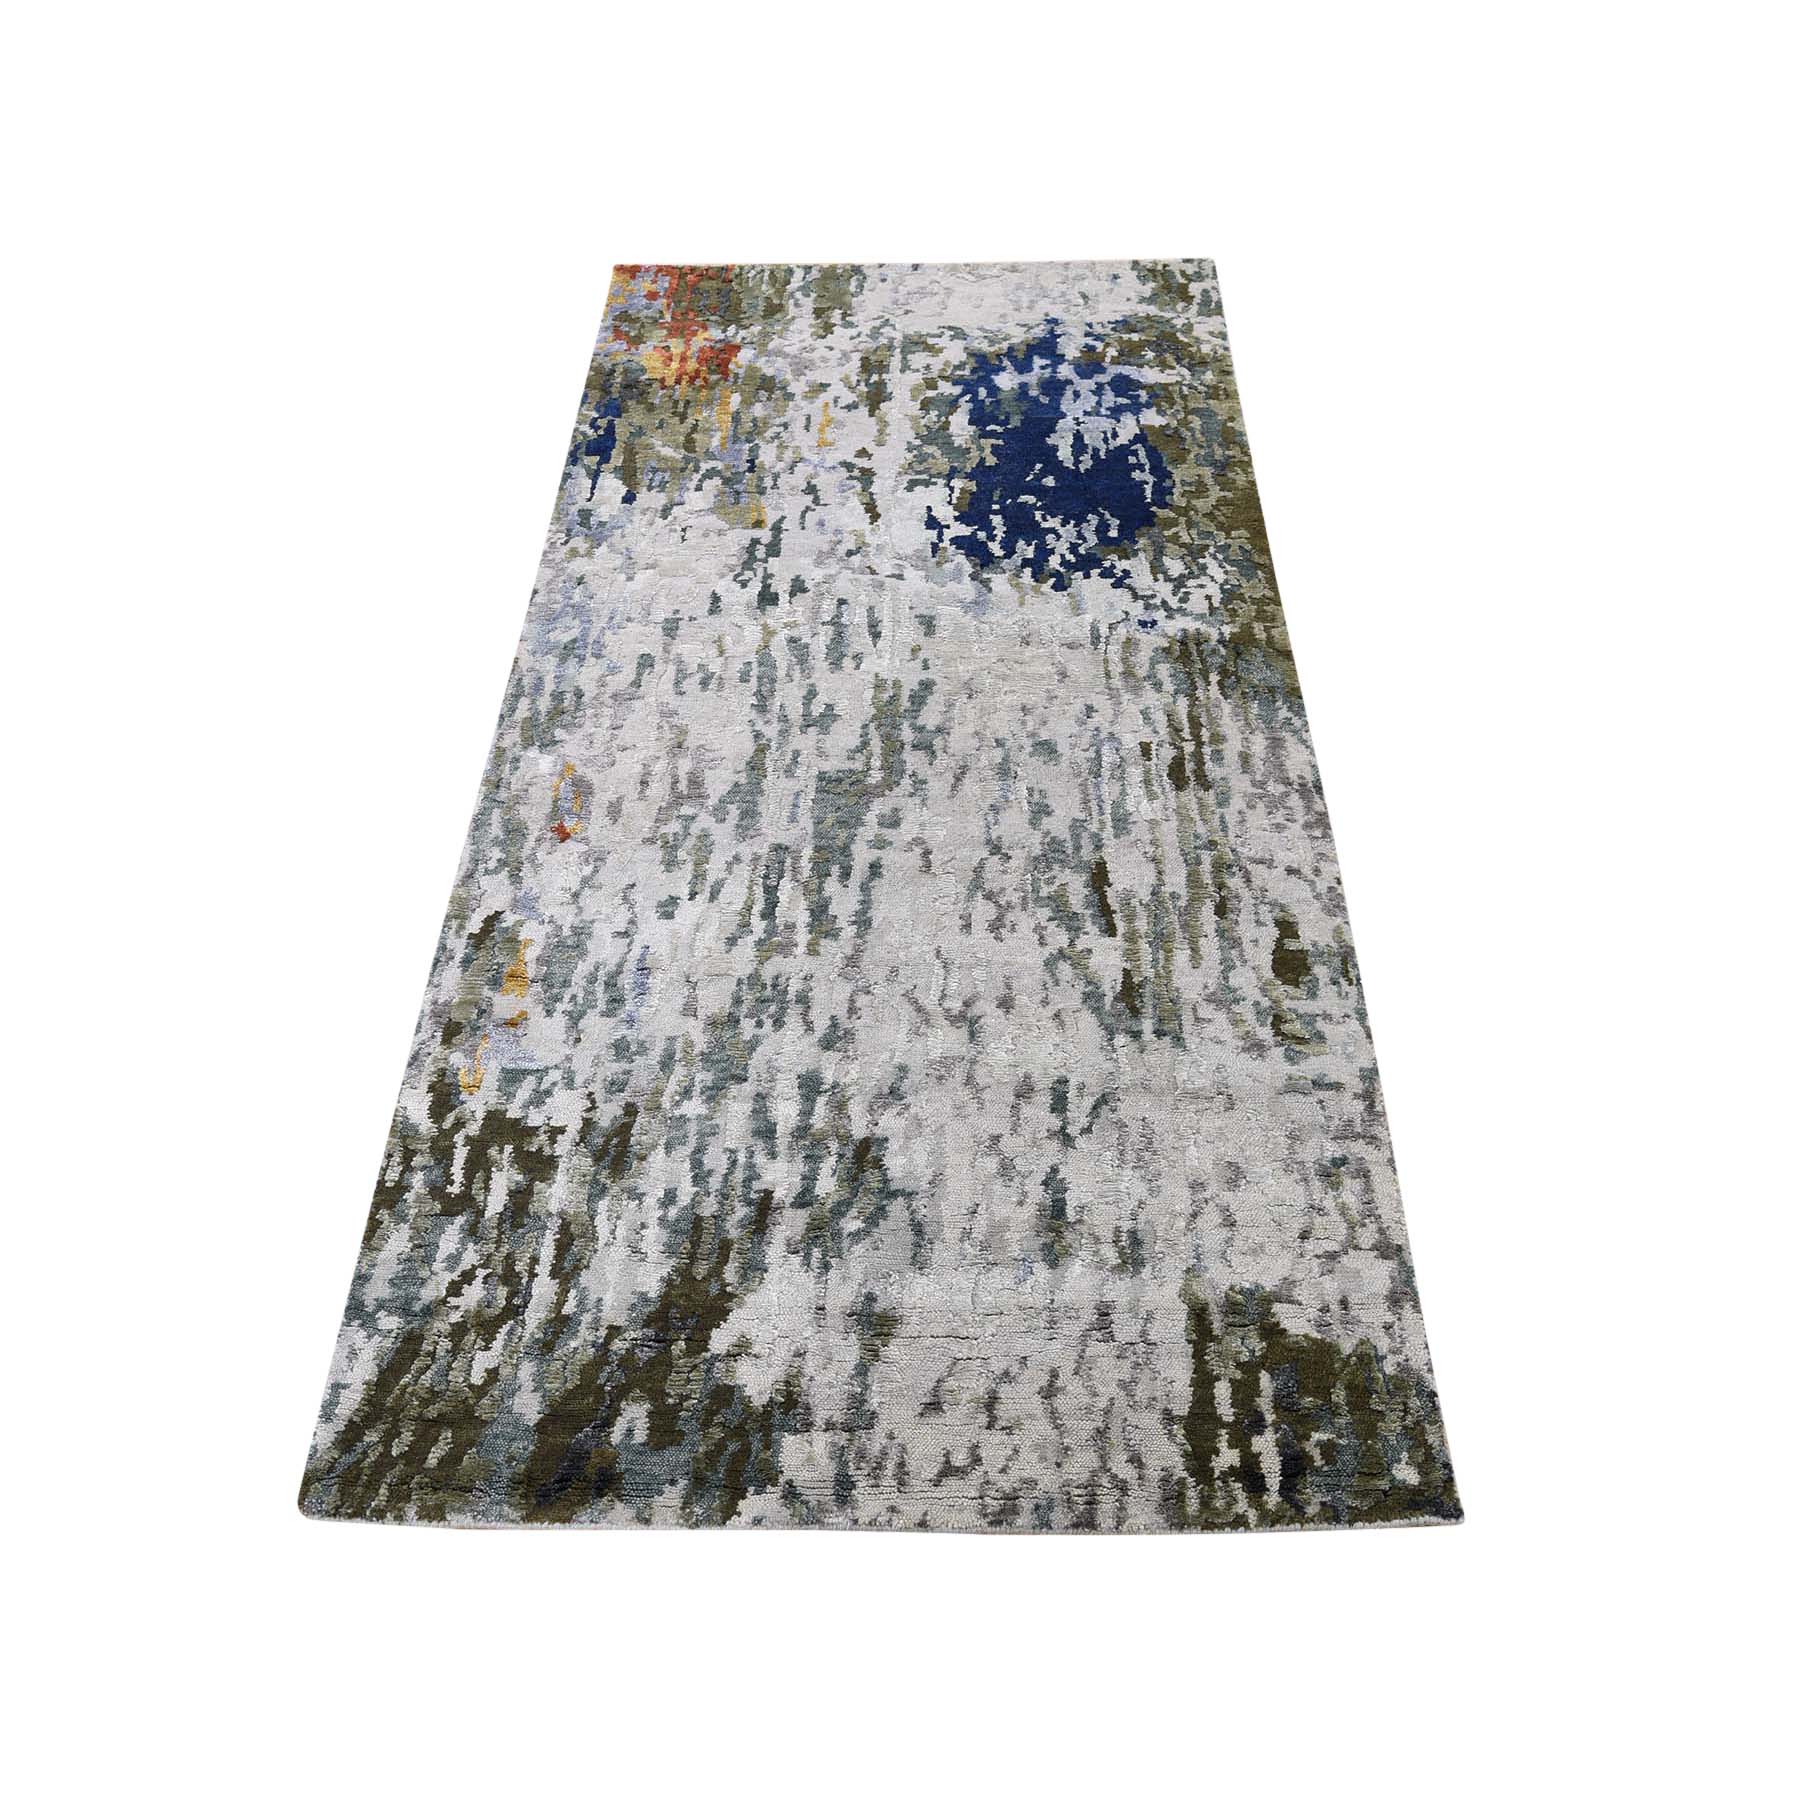 2'7"X8' Hi-Low Pile Abstract Design Wool And Silk Runner Hand-Knotted Oriental Rug moadee86